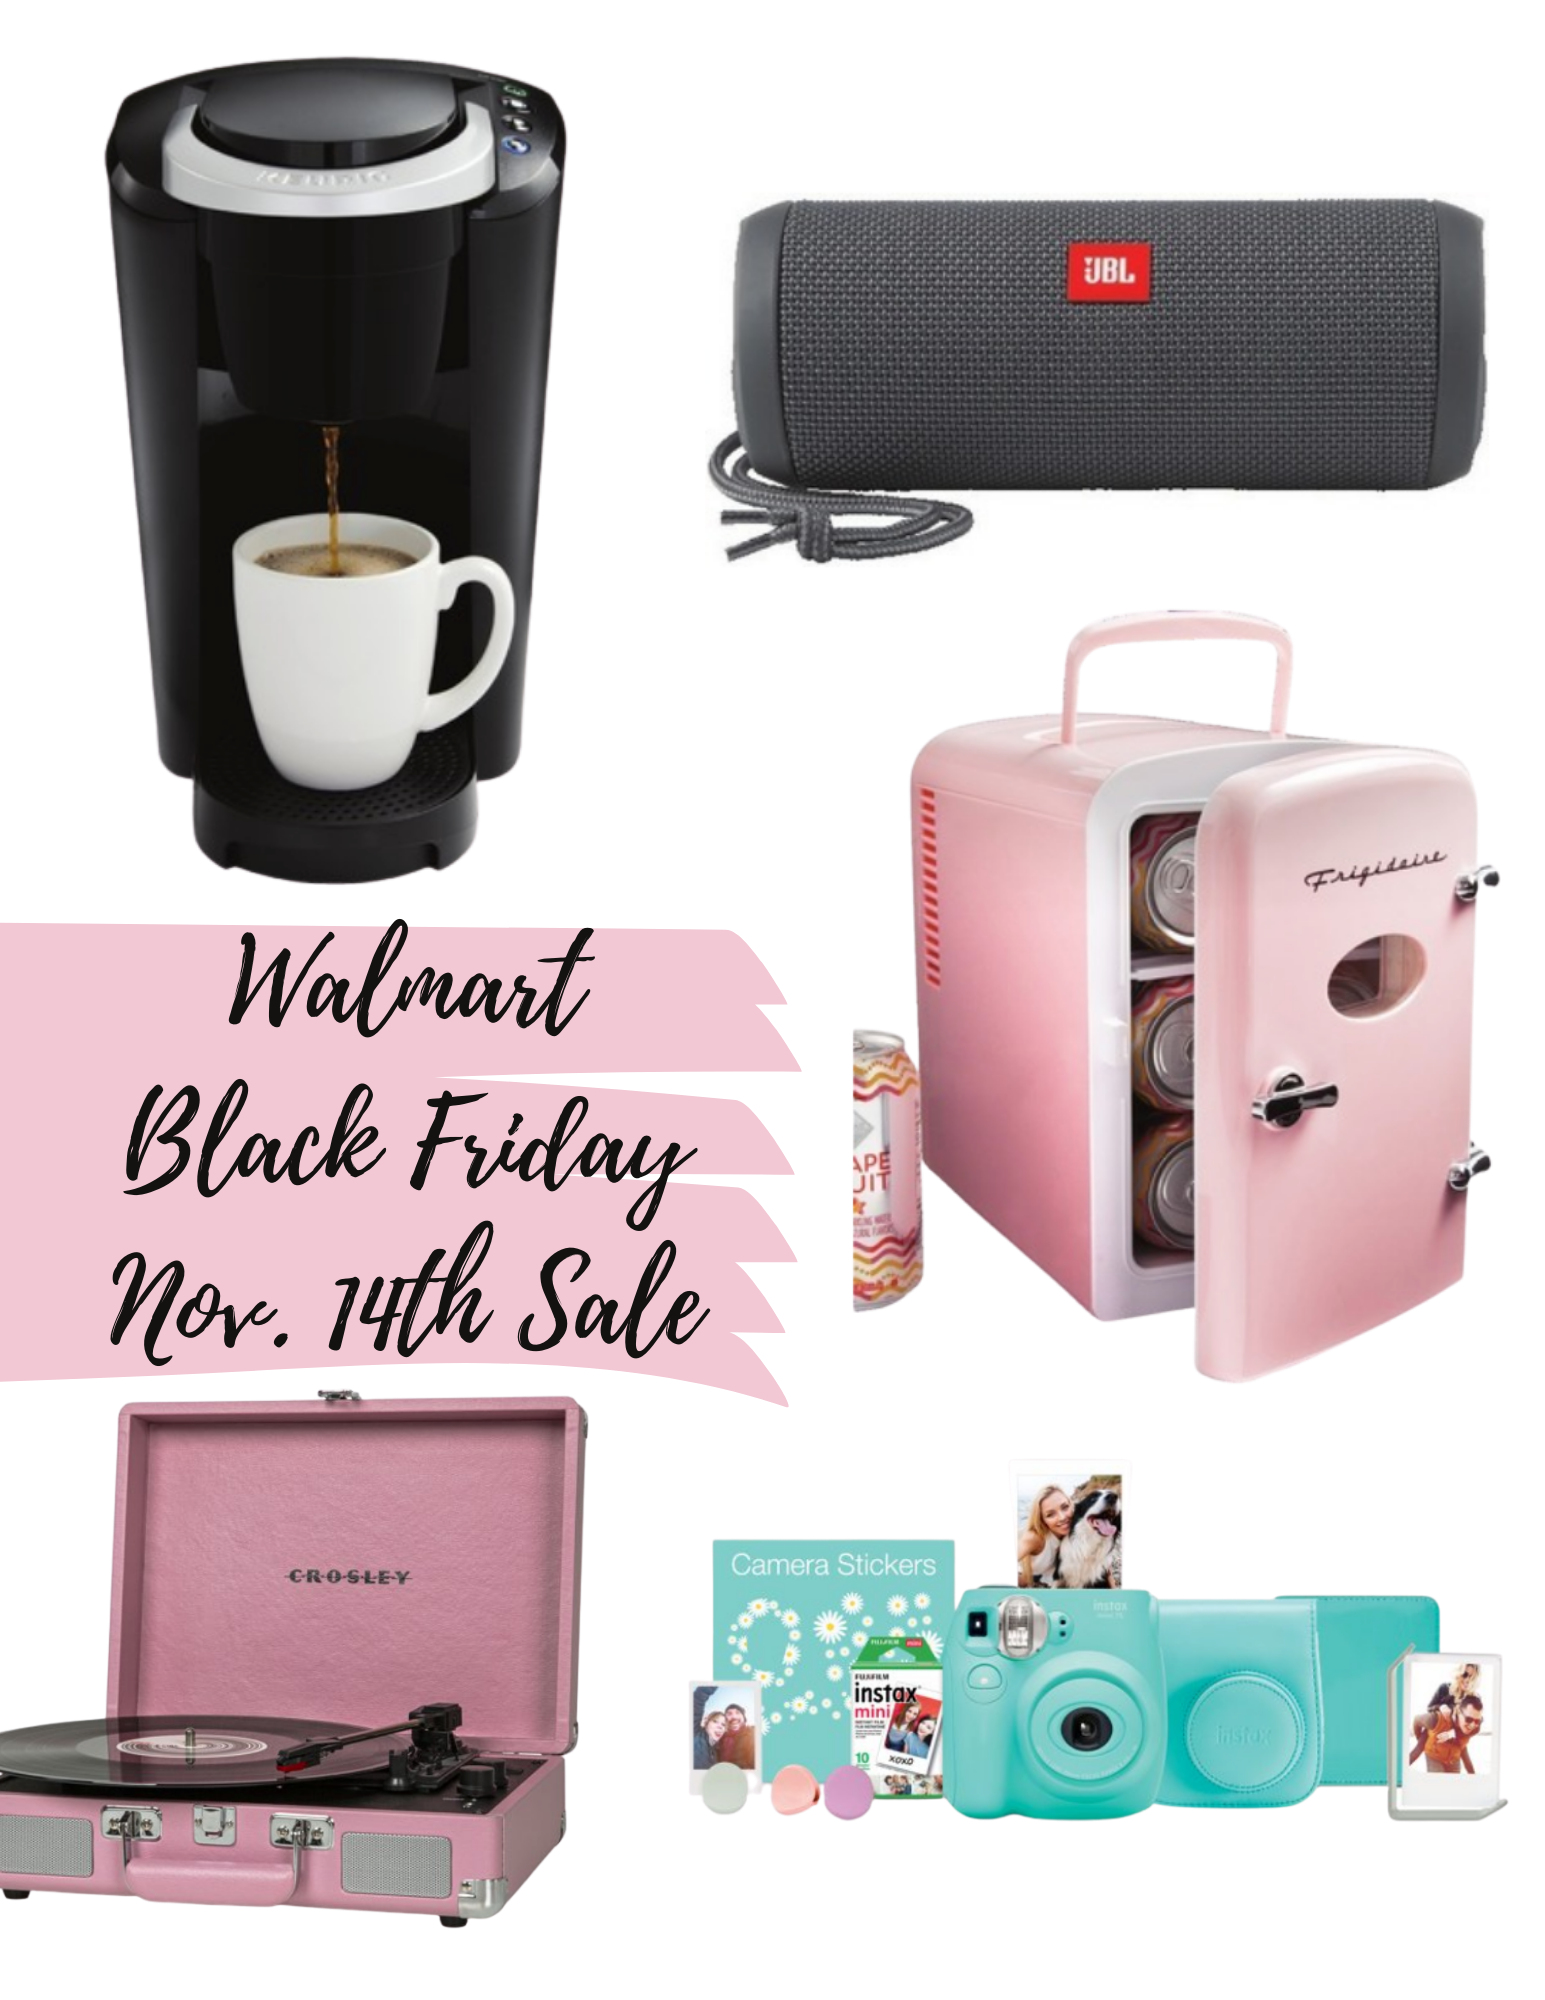 Black Friday Sales | Where I’m Shopping This Year